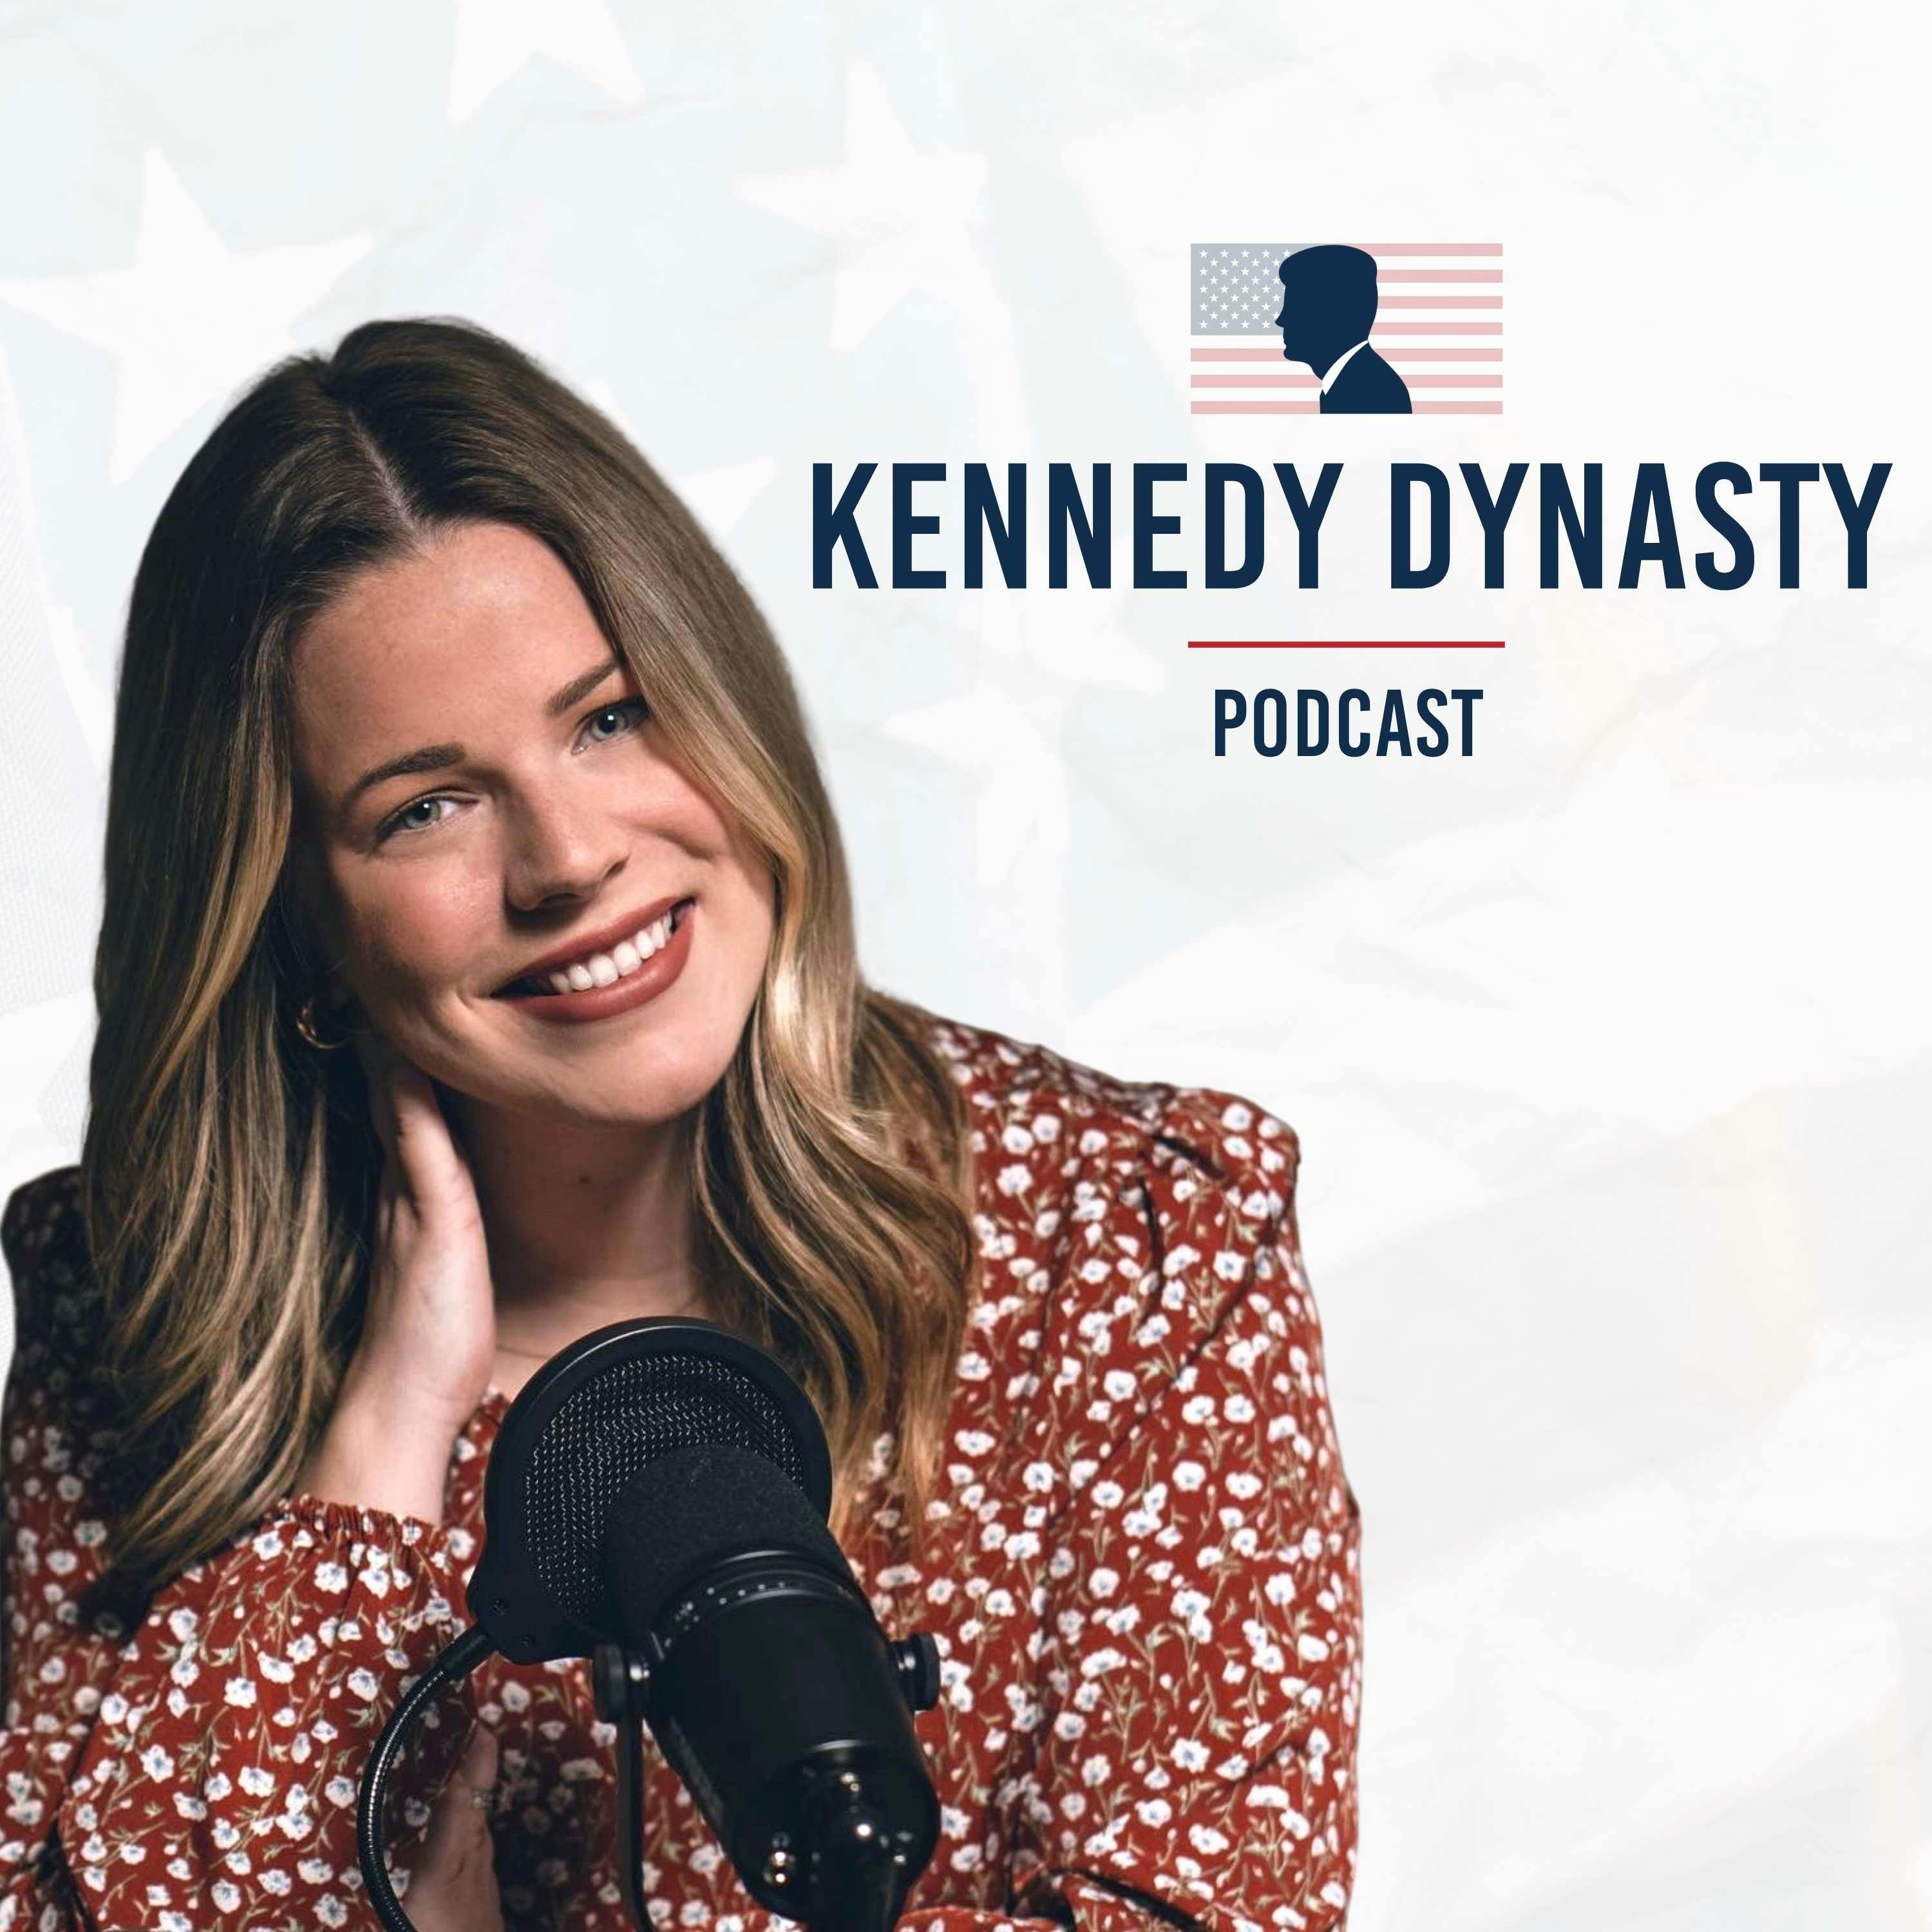 A Conversation With Author Of “The First Kennedys” Neal Thompson